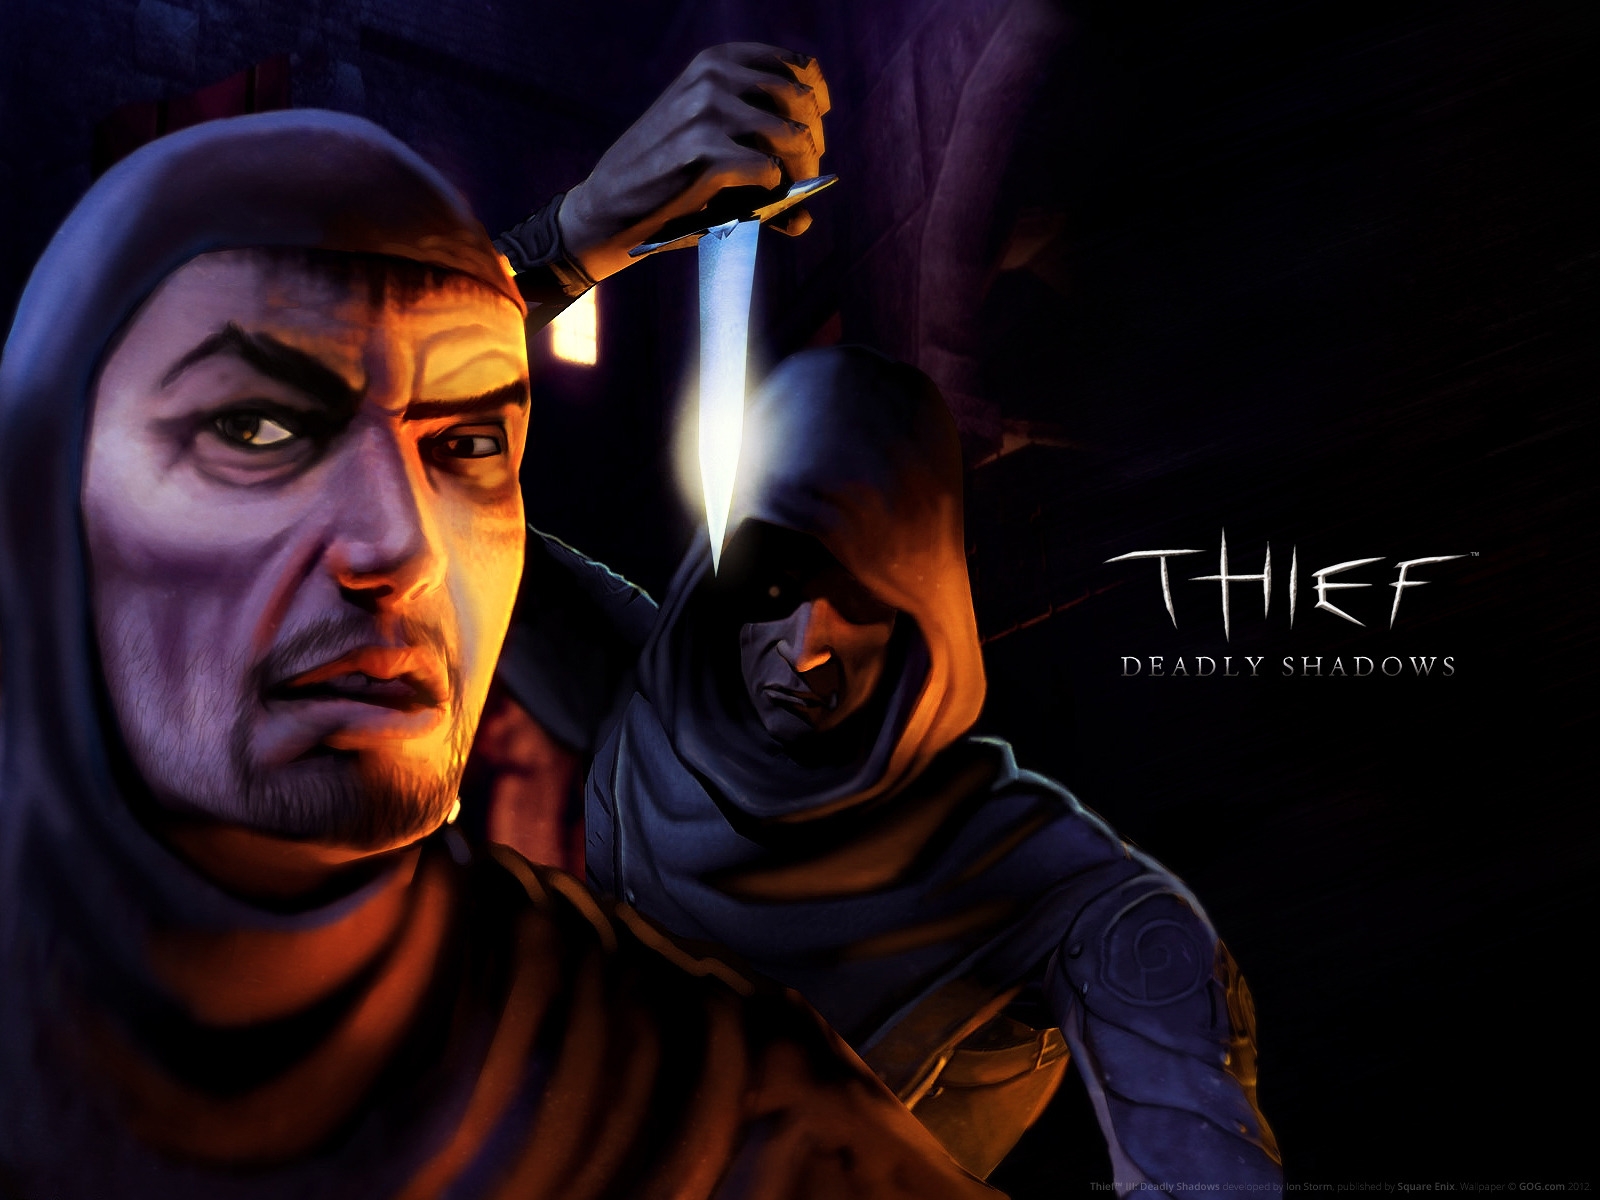 Thief Deadly Shadows for 1600 x 1200 resolution